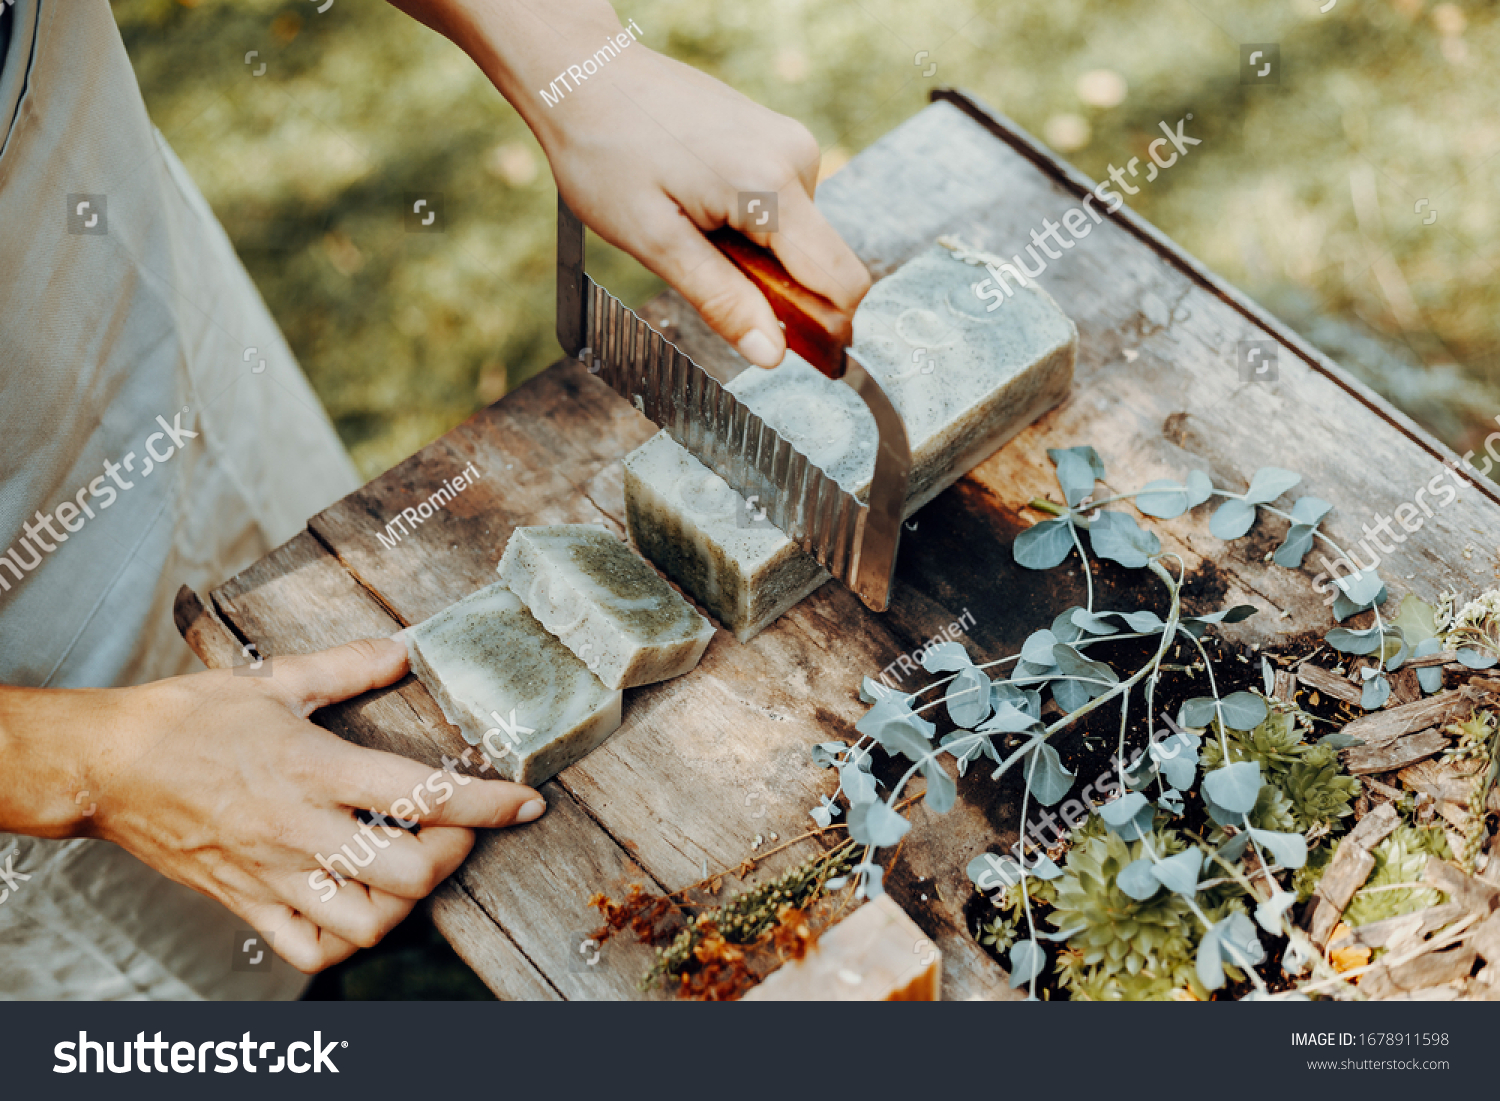 Woman is making handmade natural soaps on an old wooden table #1678911598